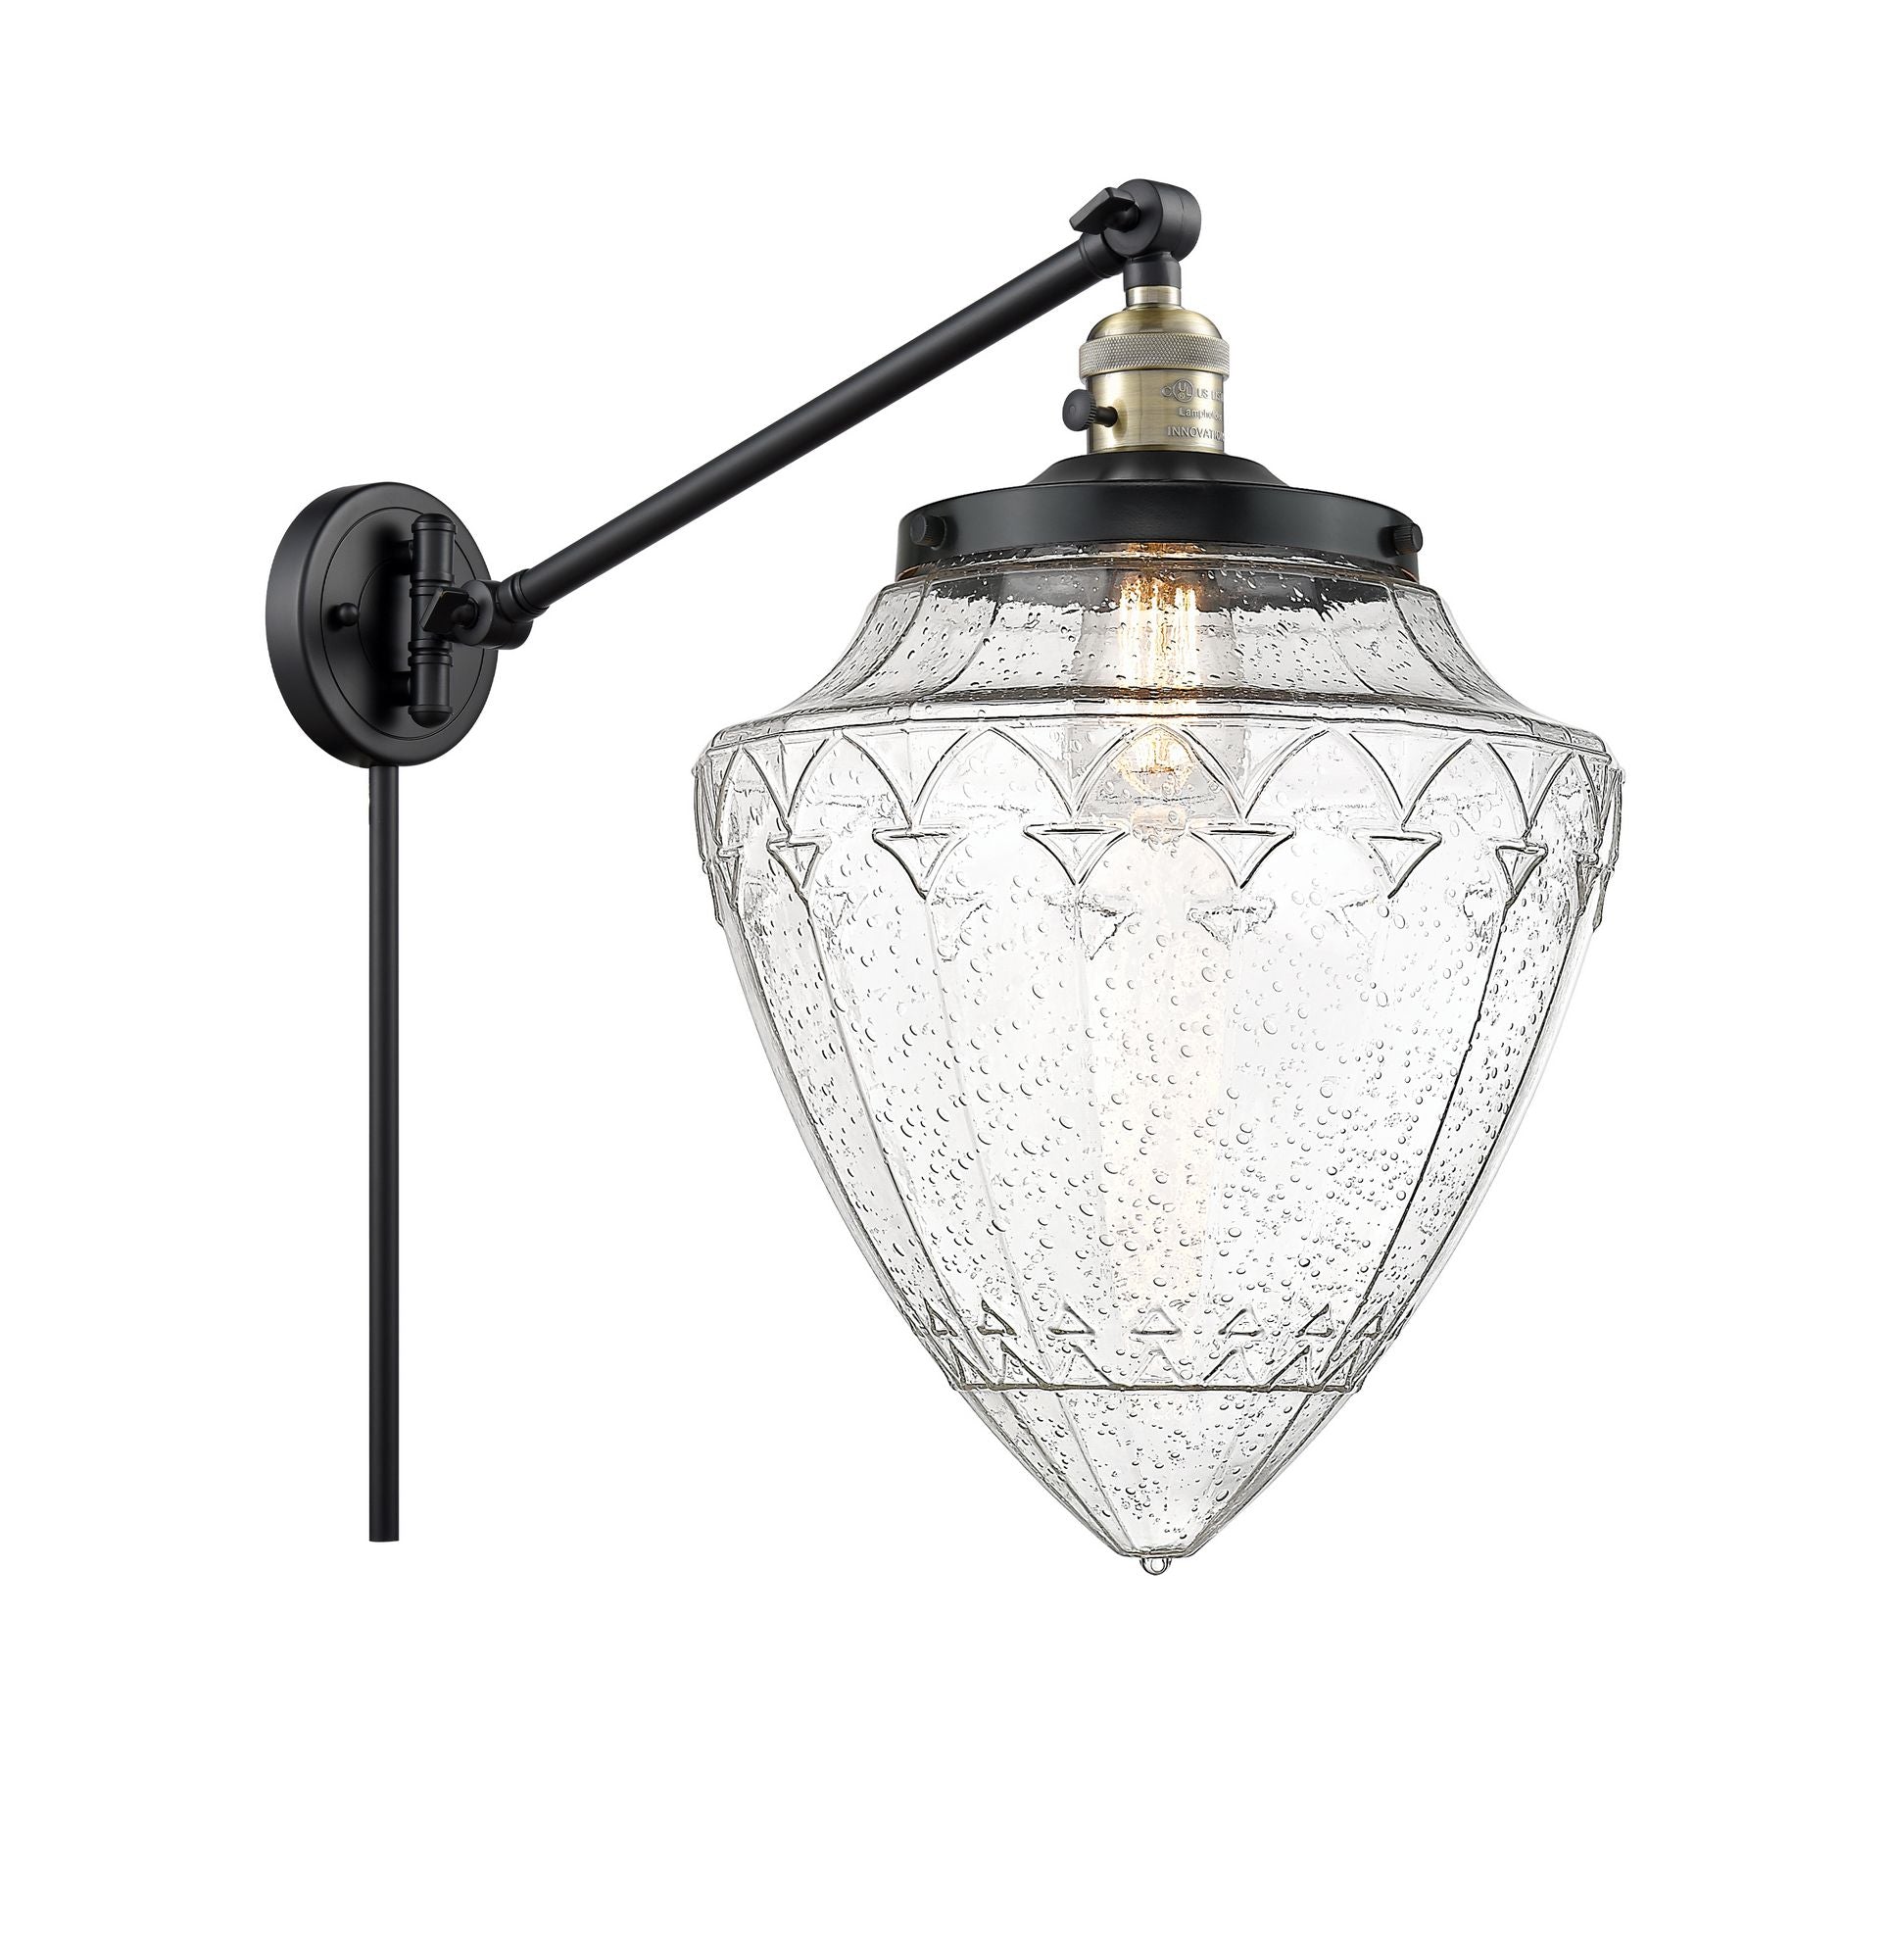 237-BAB-G664-12 1-Light 12" Black Antique Brass Swing Arm - Seedy Large Bullet Glass - LED Bulb - Dimmensions: 12 x 22 x 17.75 - Glass Up or Down: Yes